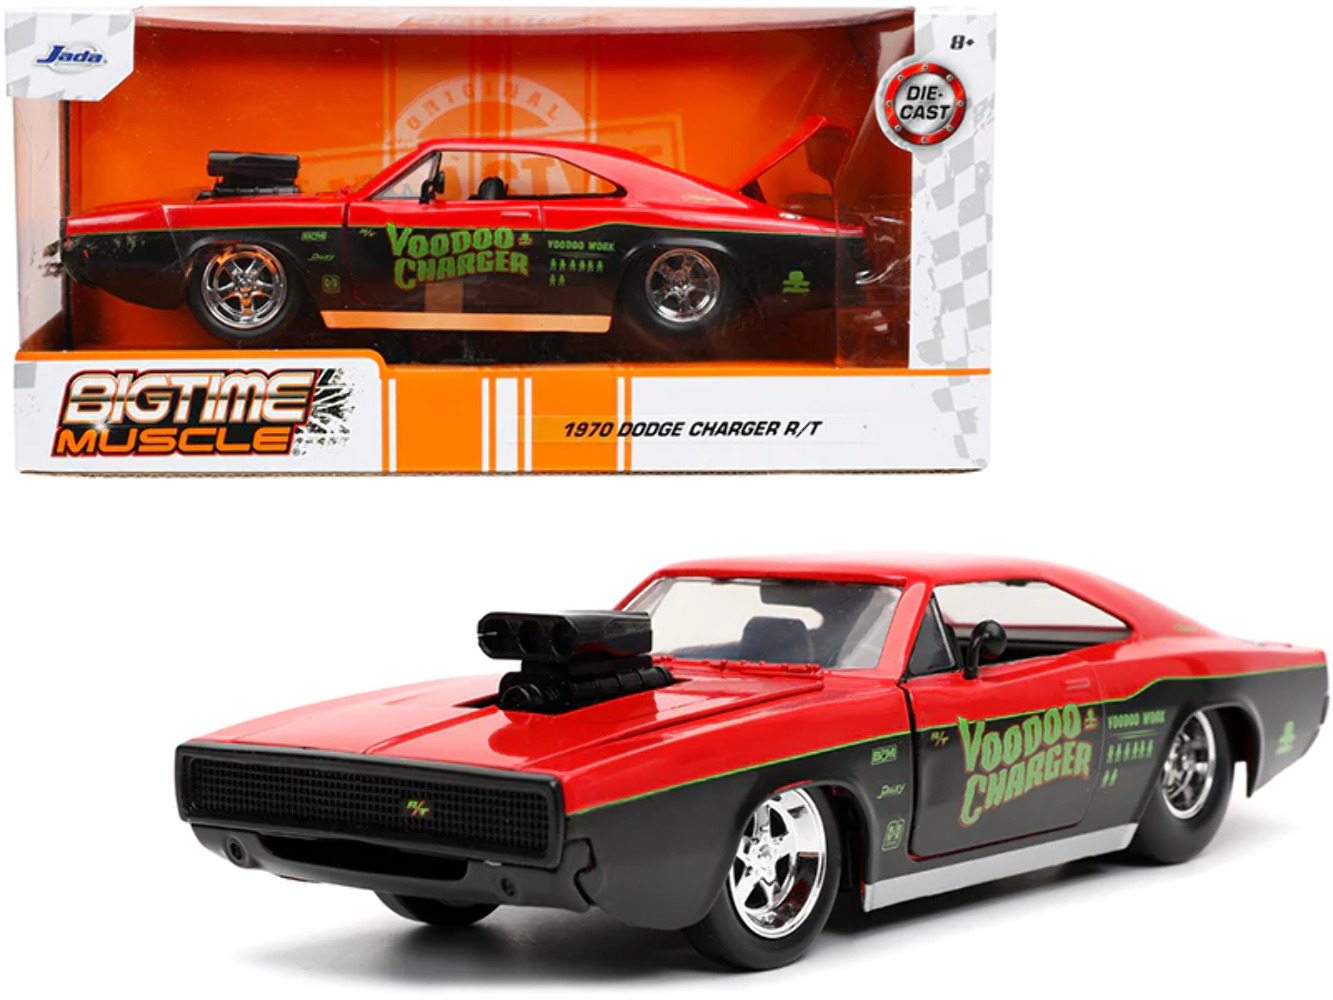 1970 Dodge Charger R/ Voodoo and Bigtime Muscle Series 1/24 Diecast Model Car